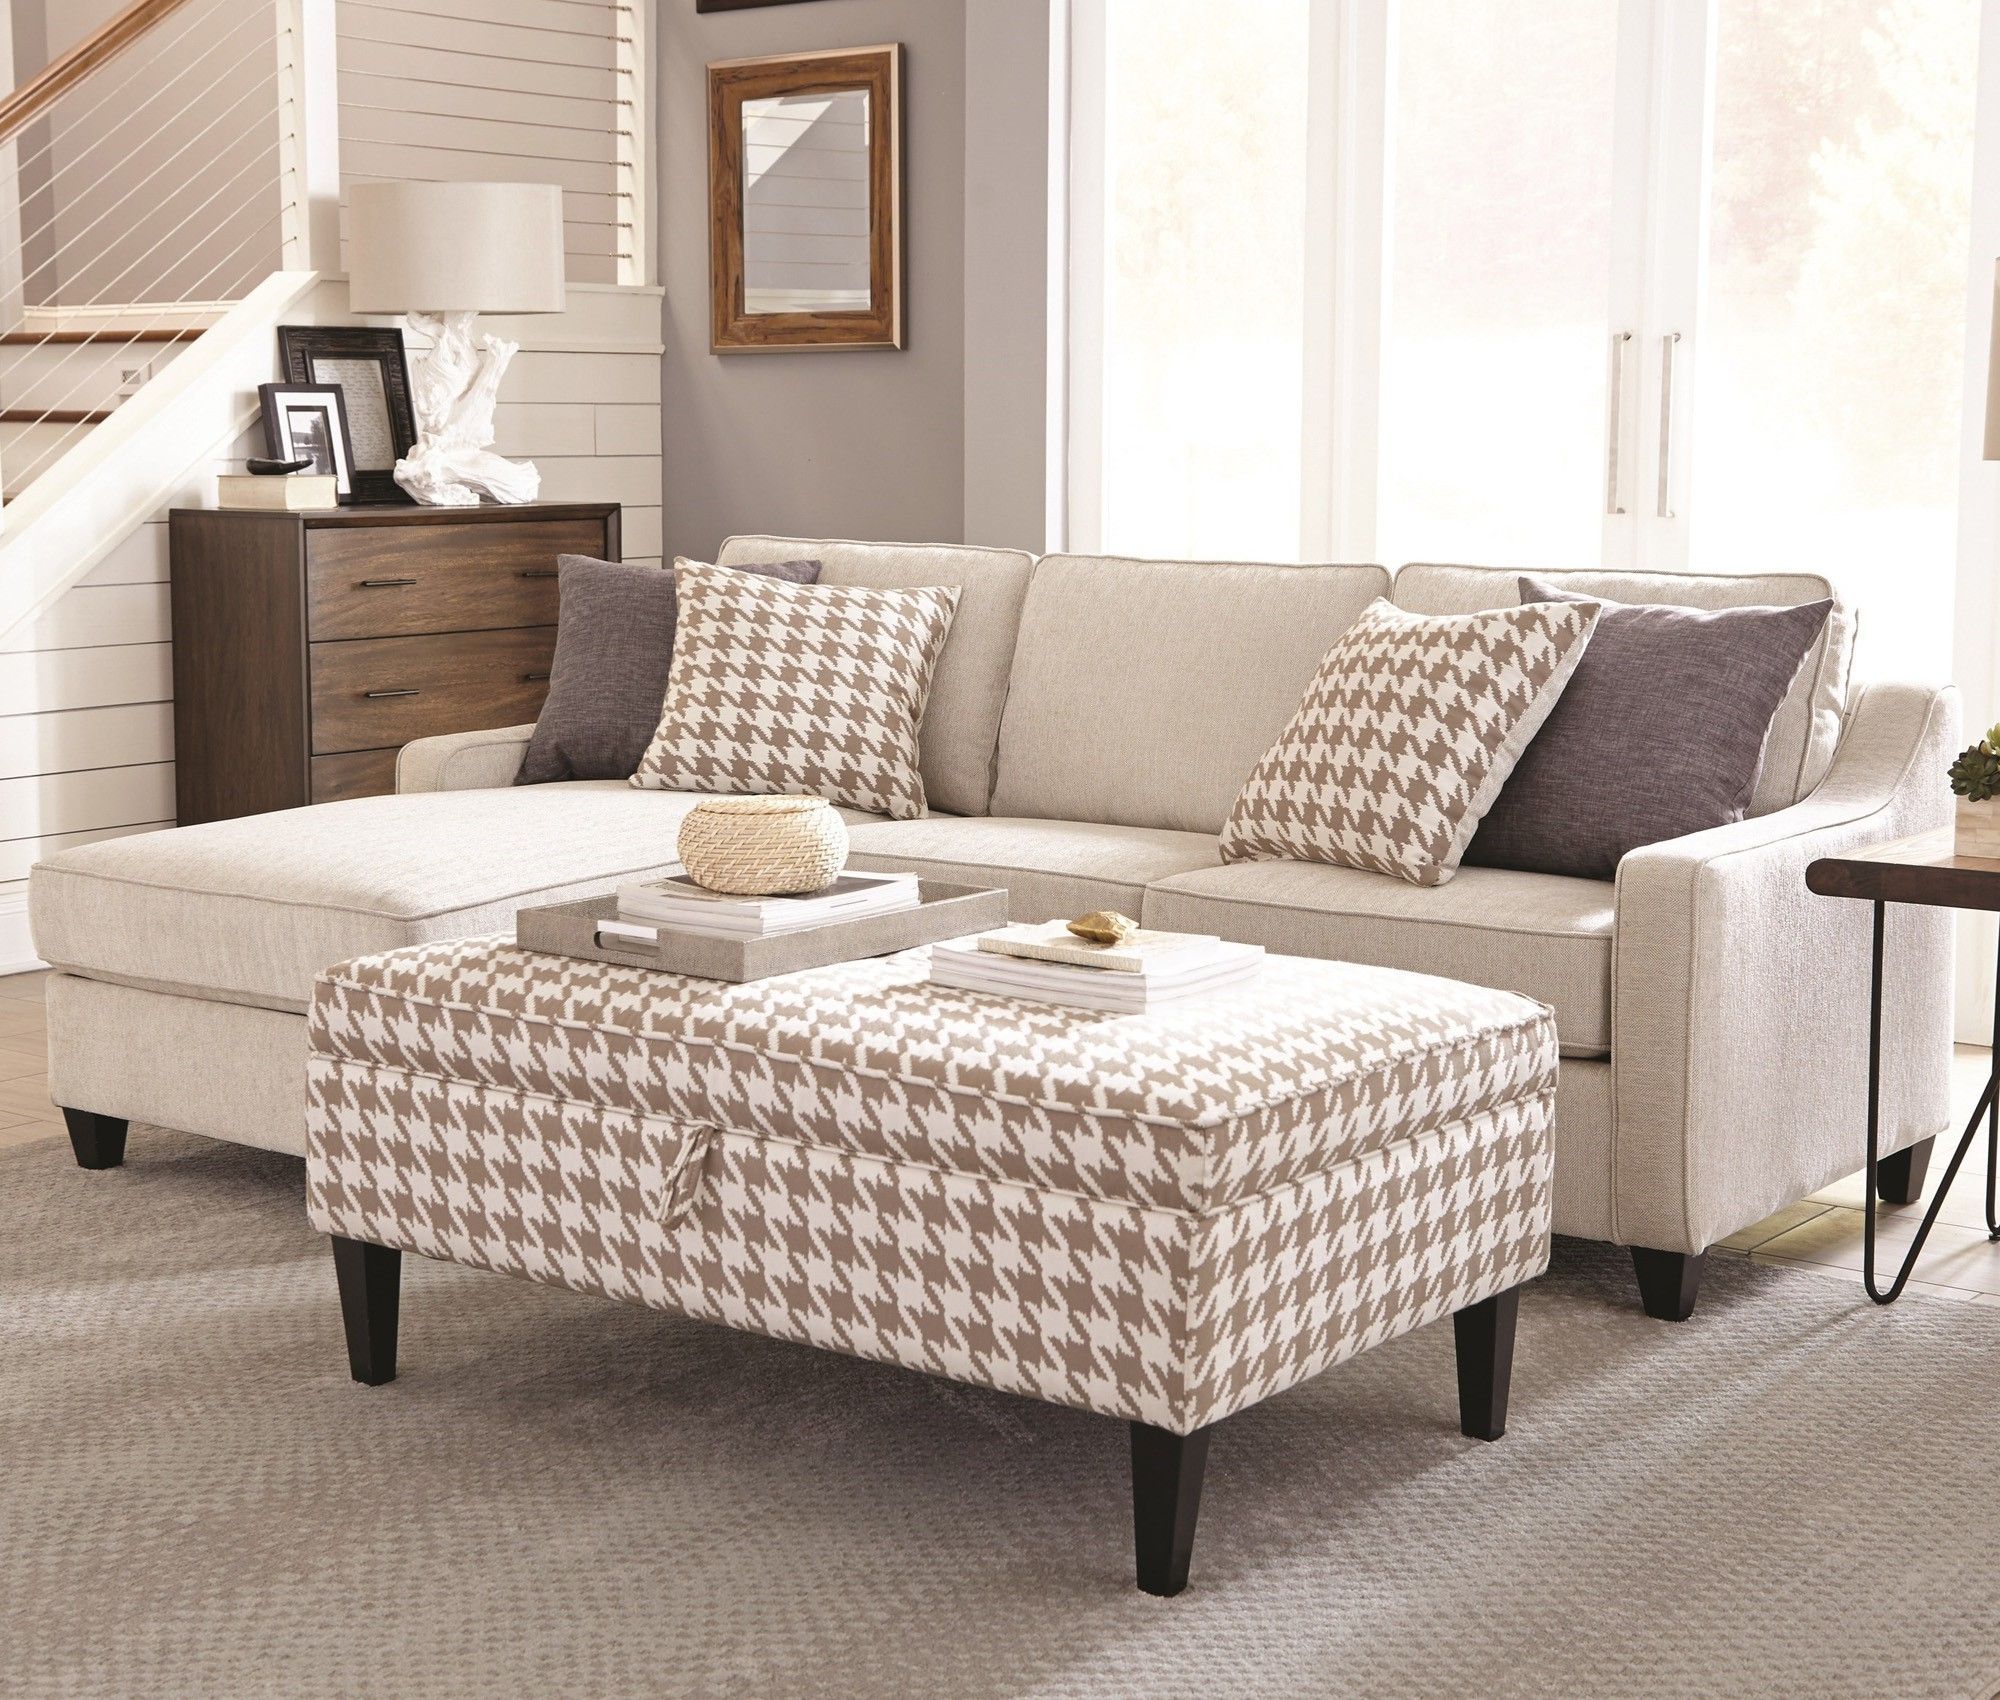 Fashionable Cream Chaise Sofas For Montgomery Cream Reversible Chaise Sectional Sofa With Storage (View 15 of 15)